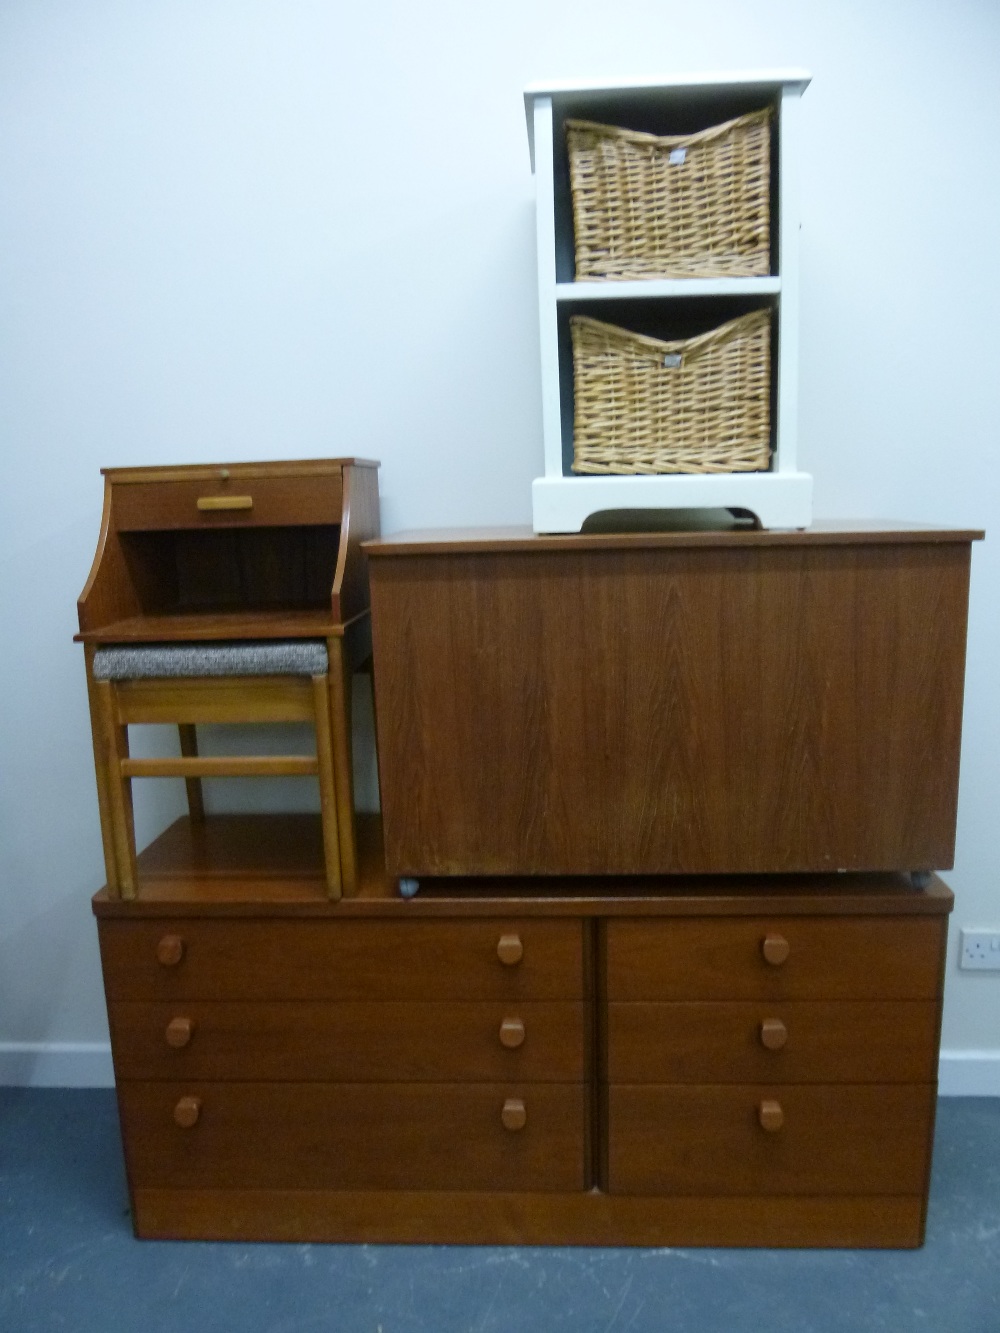 'Stag' chest of drawers, a storage chest, telephone table and a cream cupboard with baskets